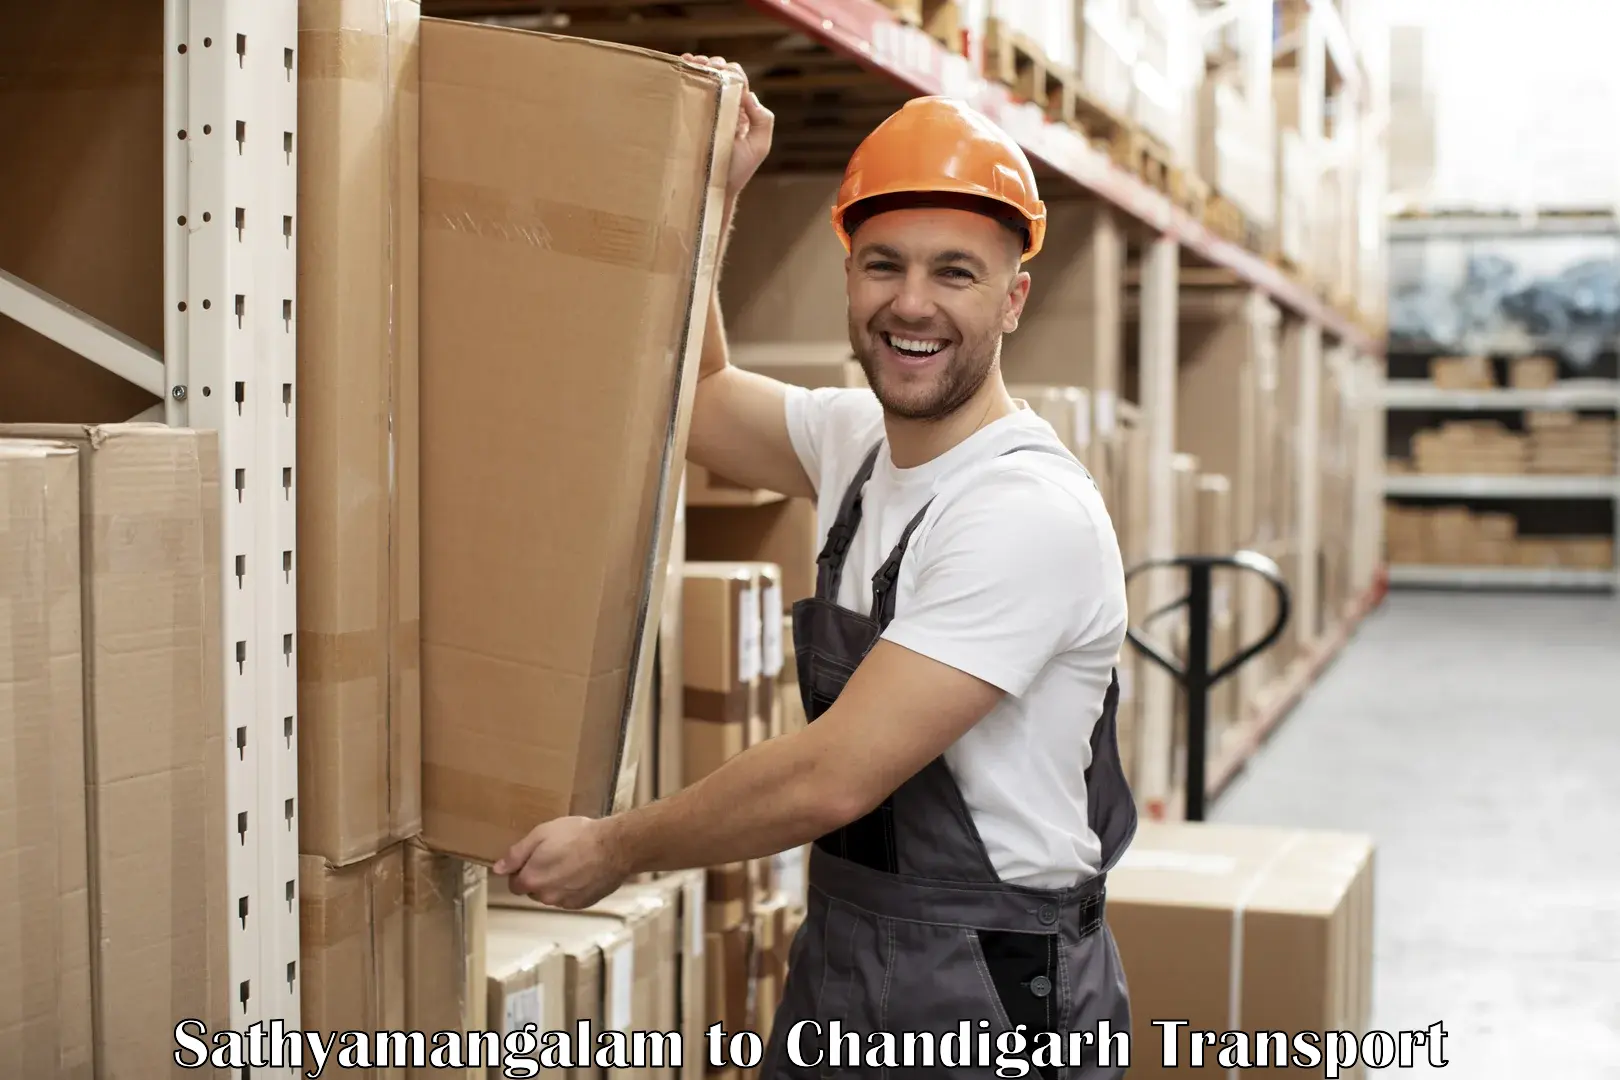 Goods delivery service Sathyamangalam to Chandigarh